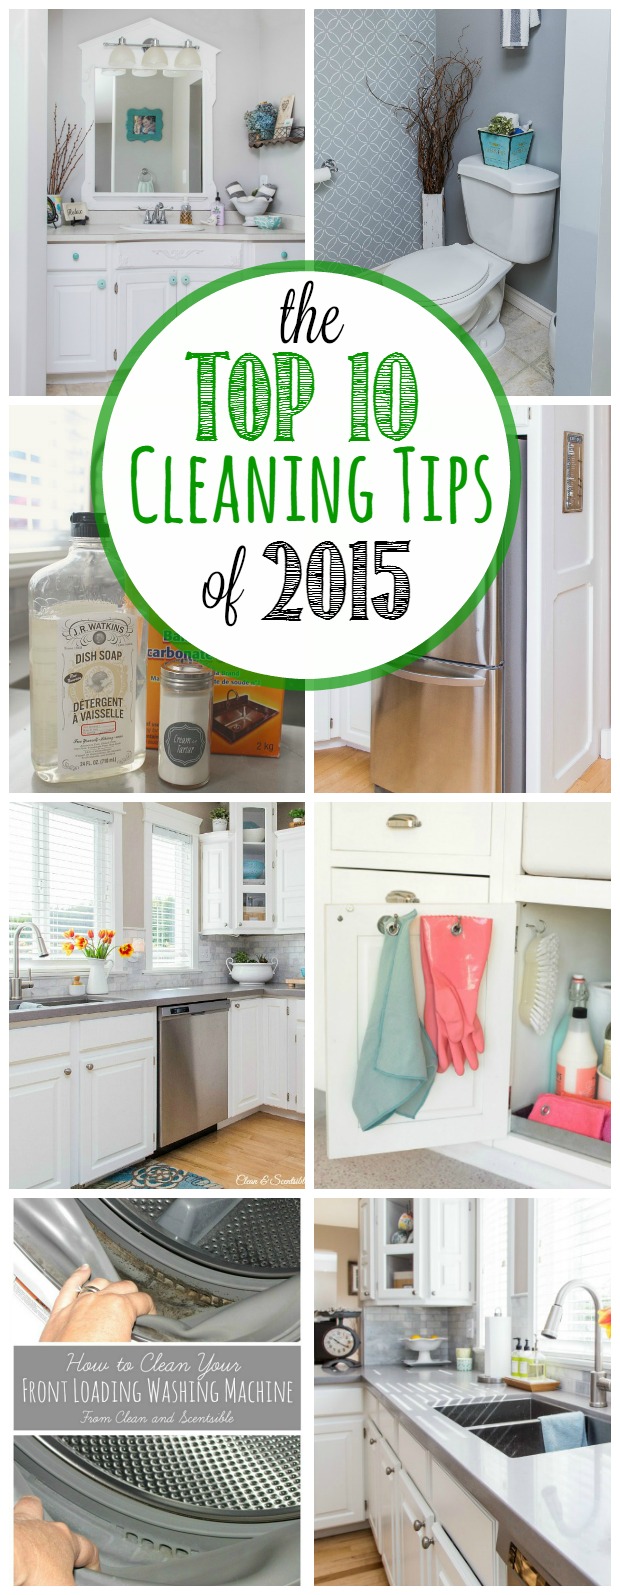 What's the Best (and Worst) Day To Clean Your House?